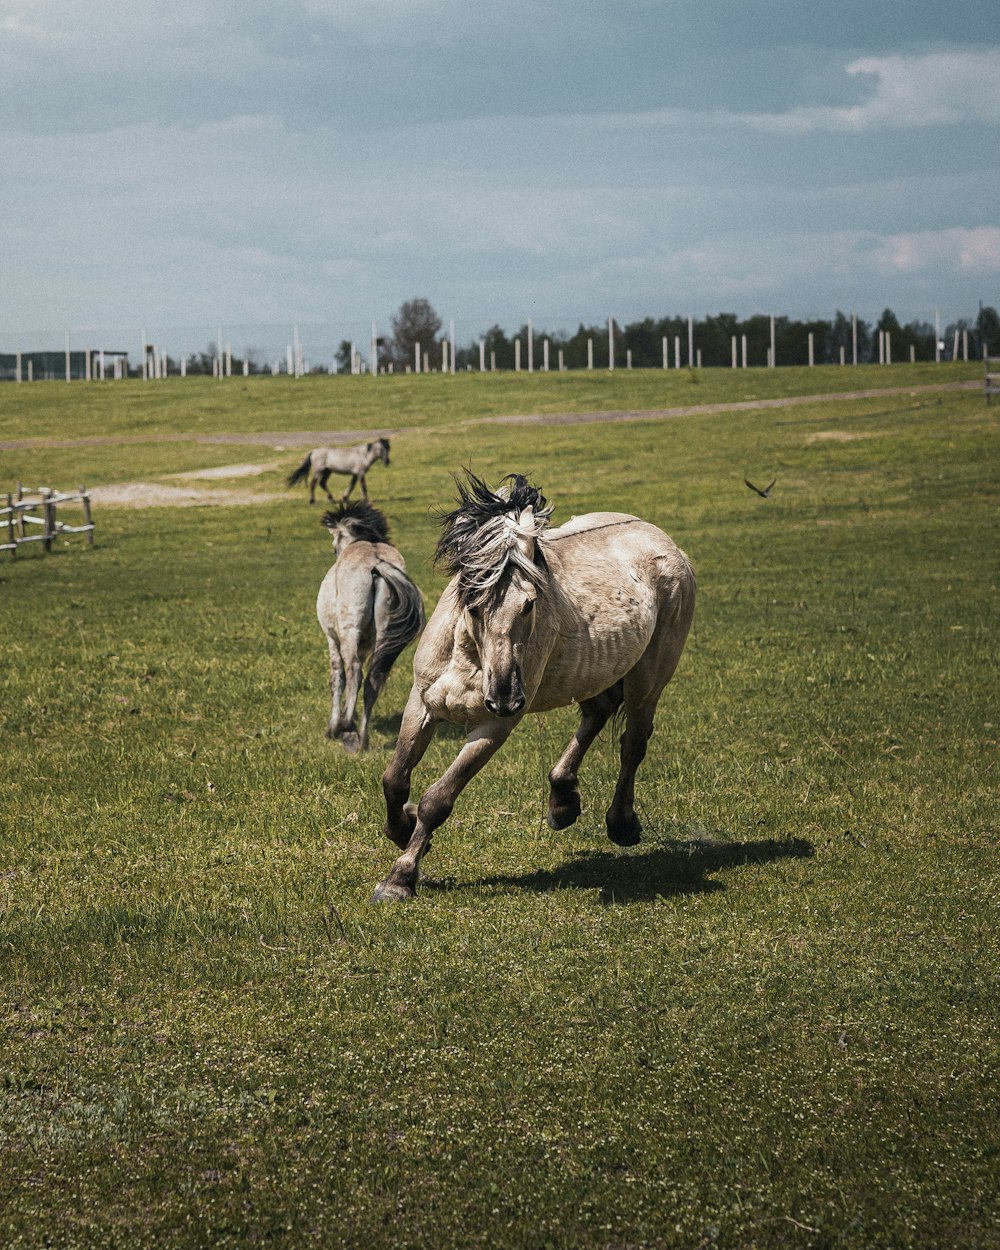 a couple of horses running across a lush green field